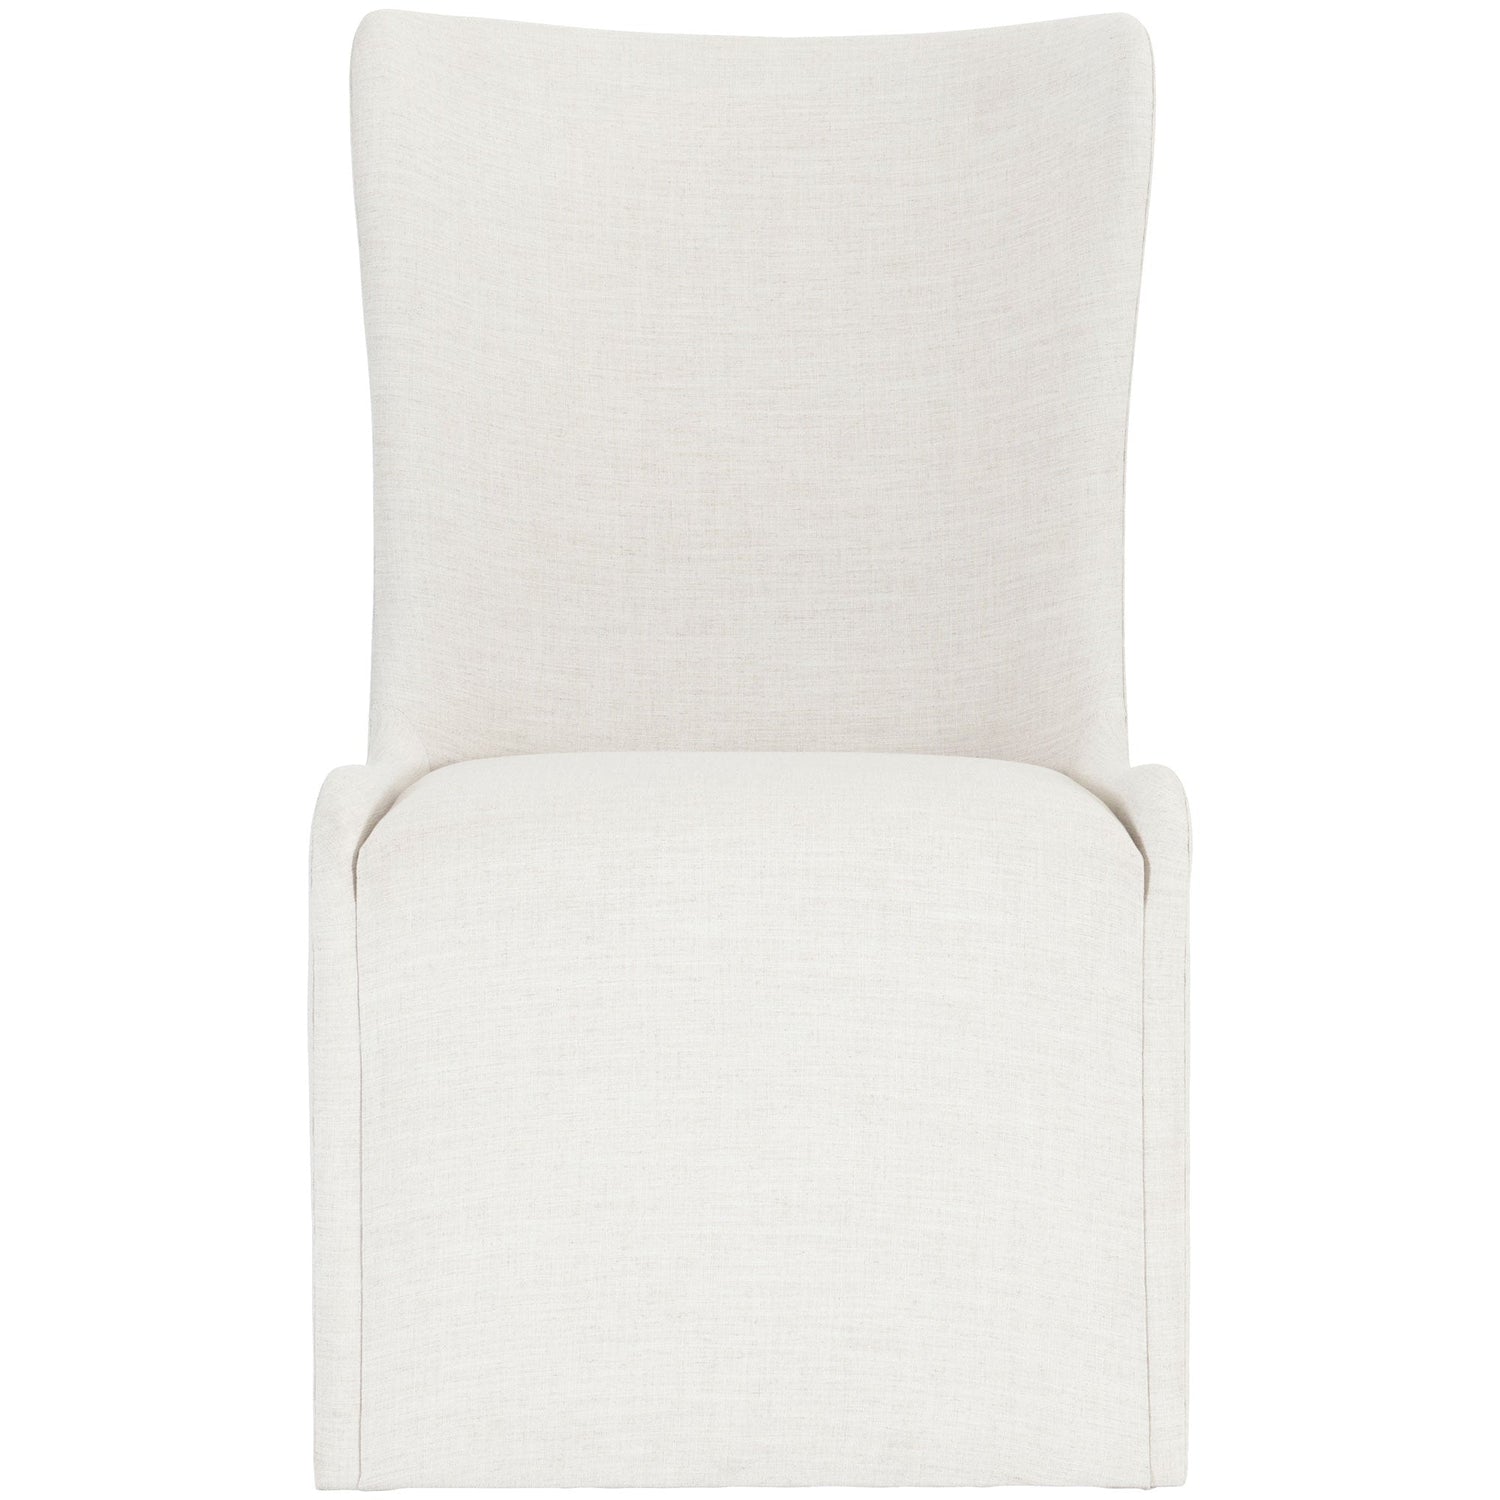 Bernhardt, Albion Side Chair with Slipcover